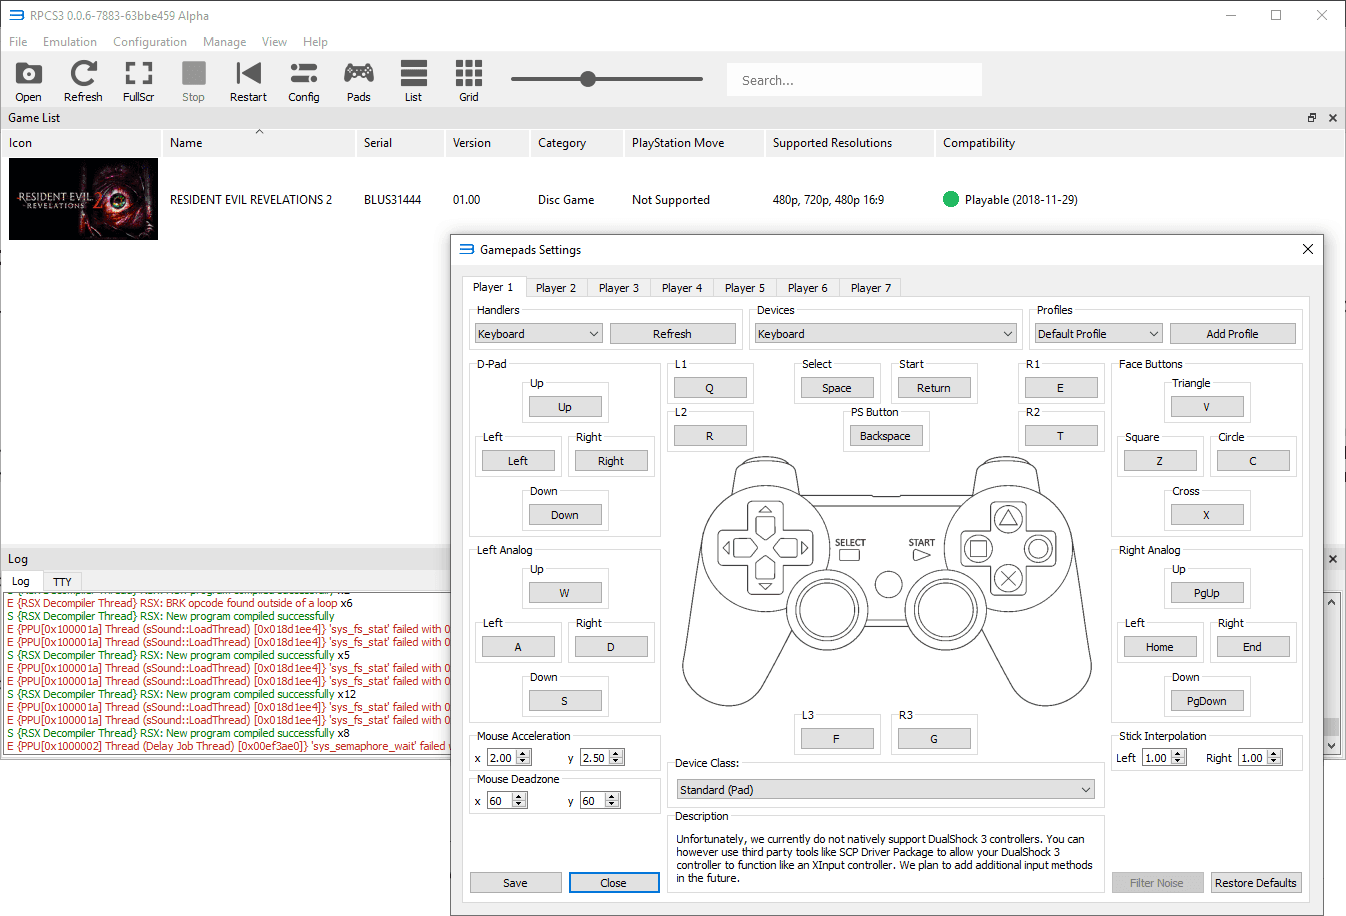 where to put the ps3 bios file in rpcs3 emulator